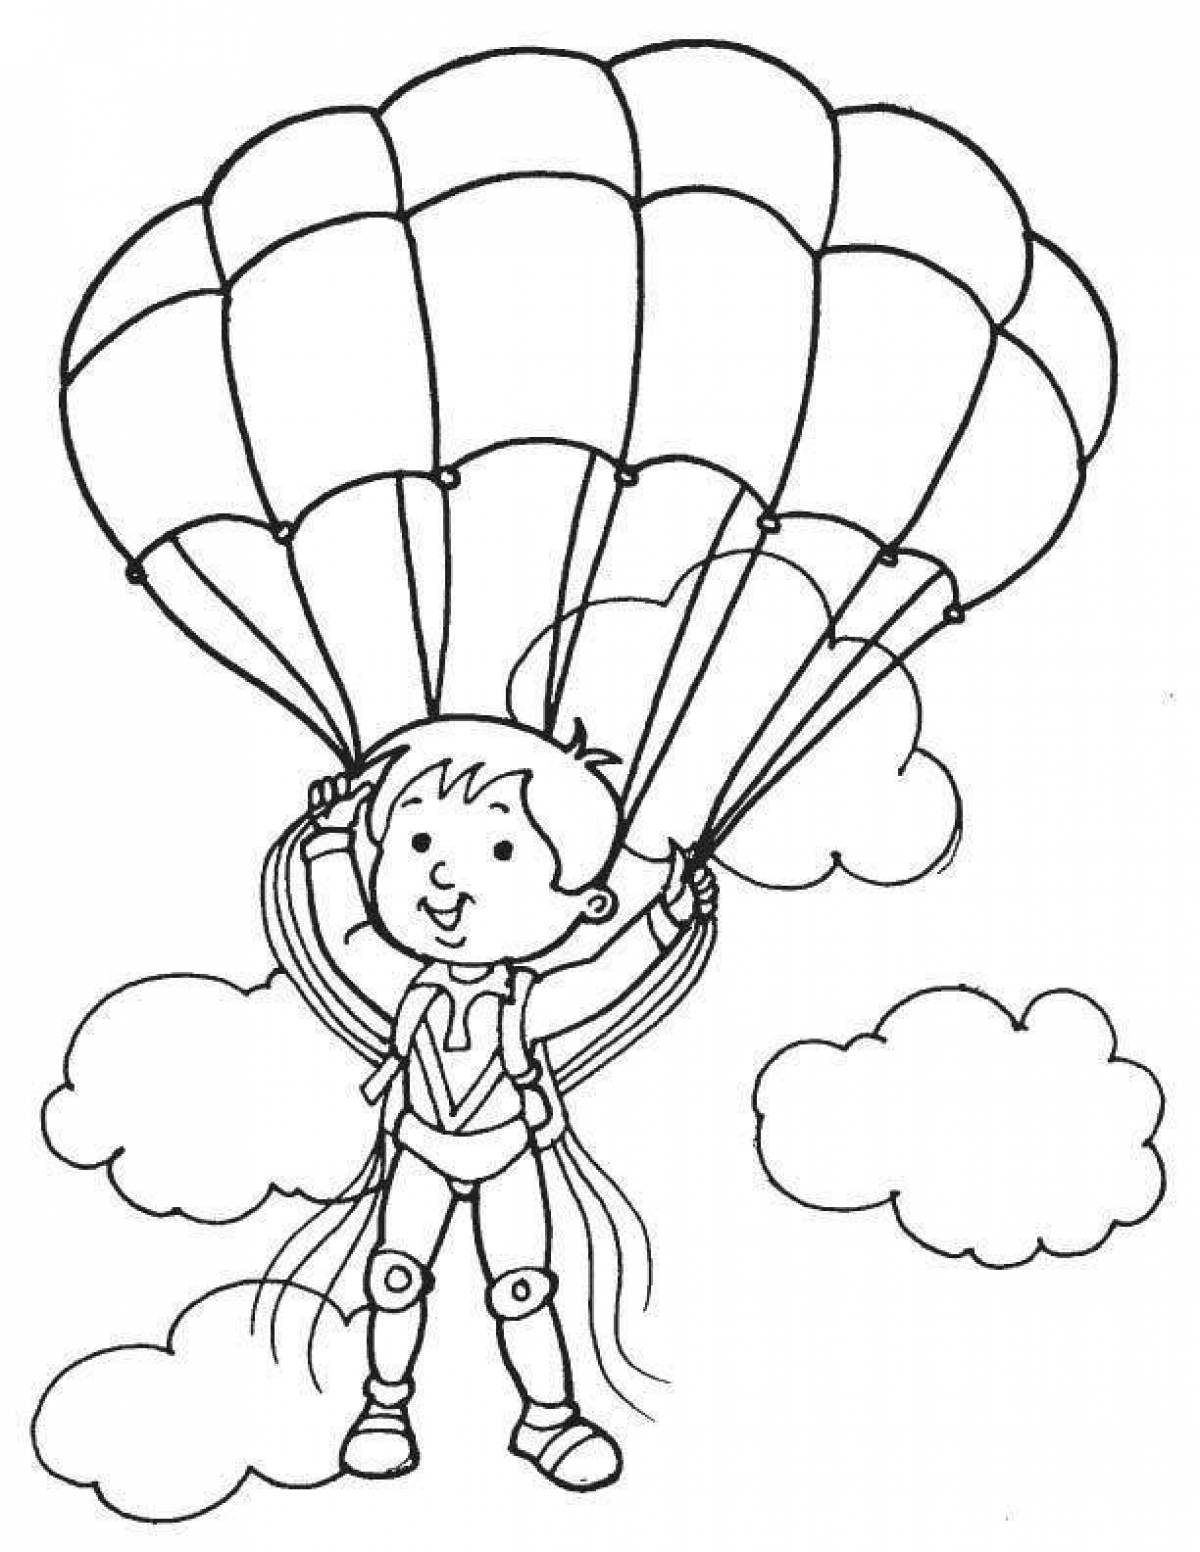 Coloring book valiant skydiver